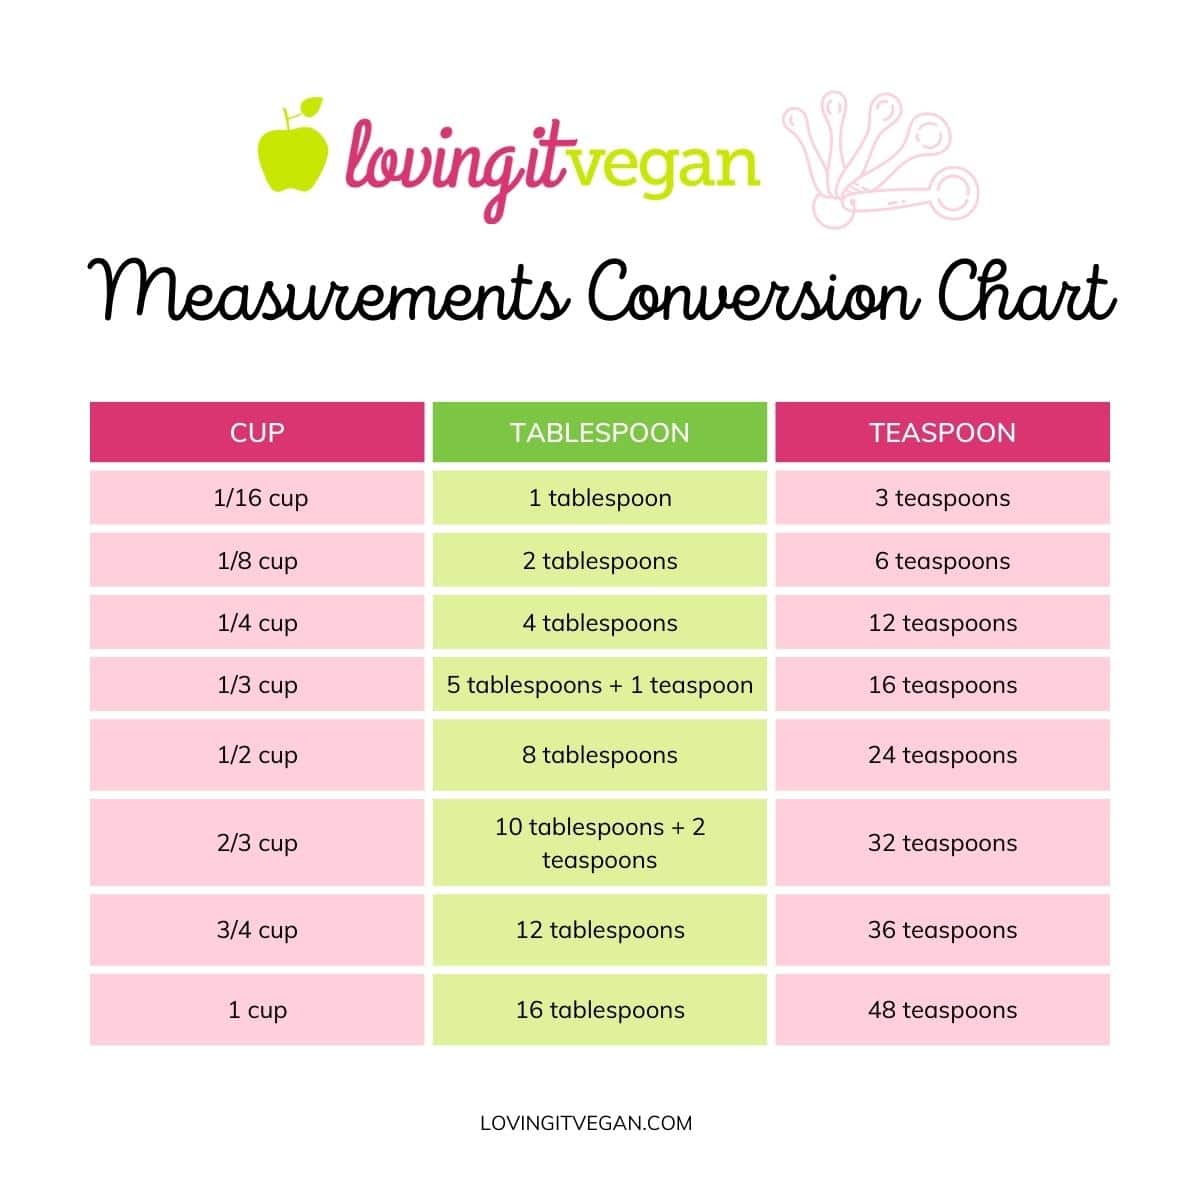 Measurement chart cups, tablespoons and teaspoons.